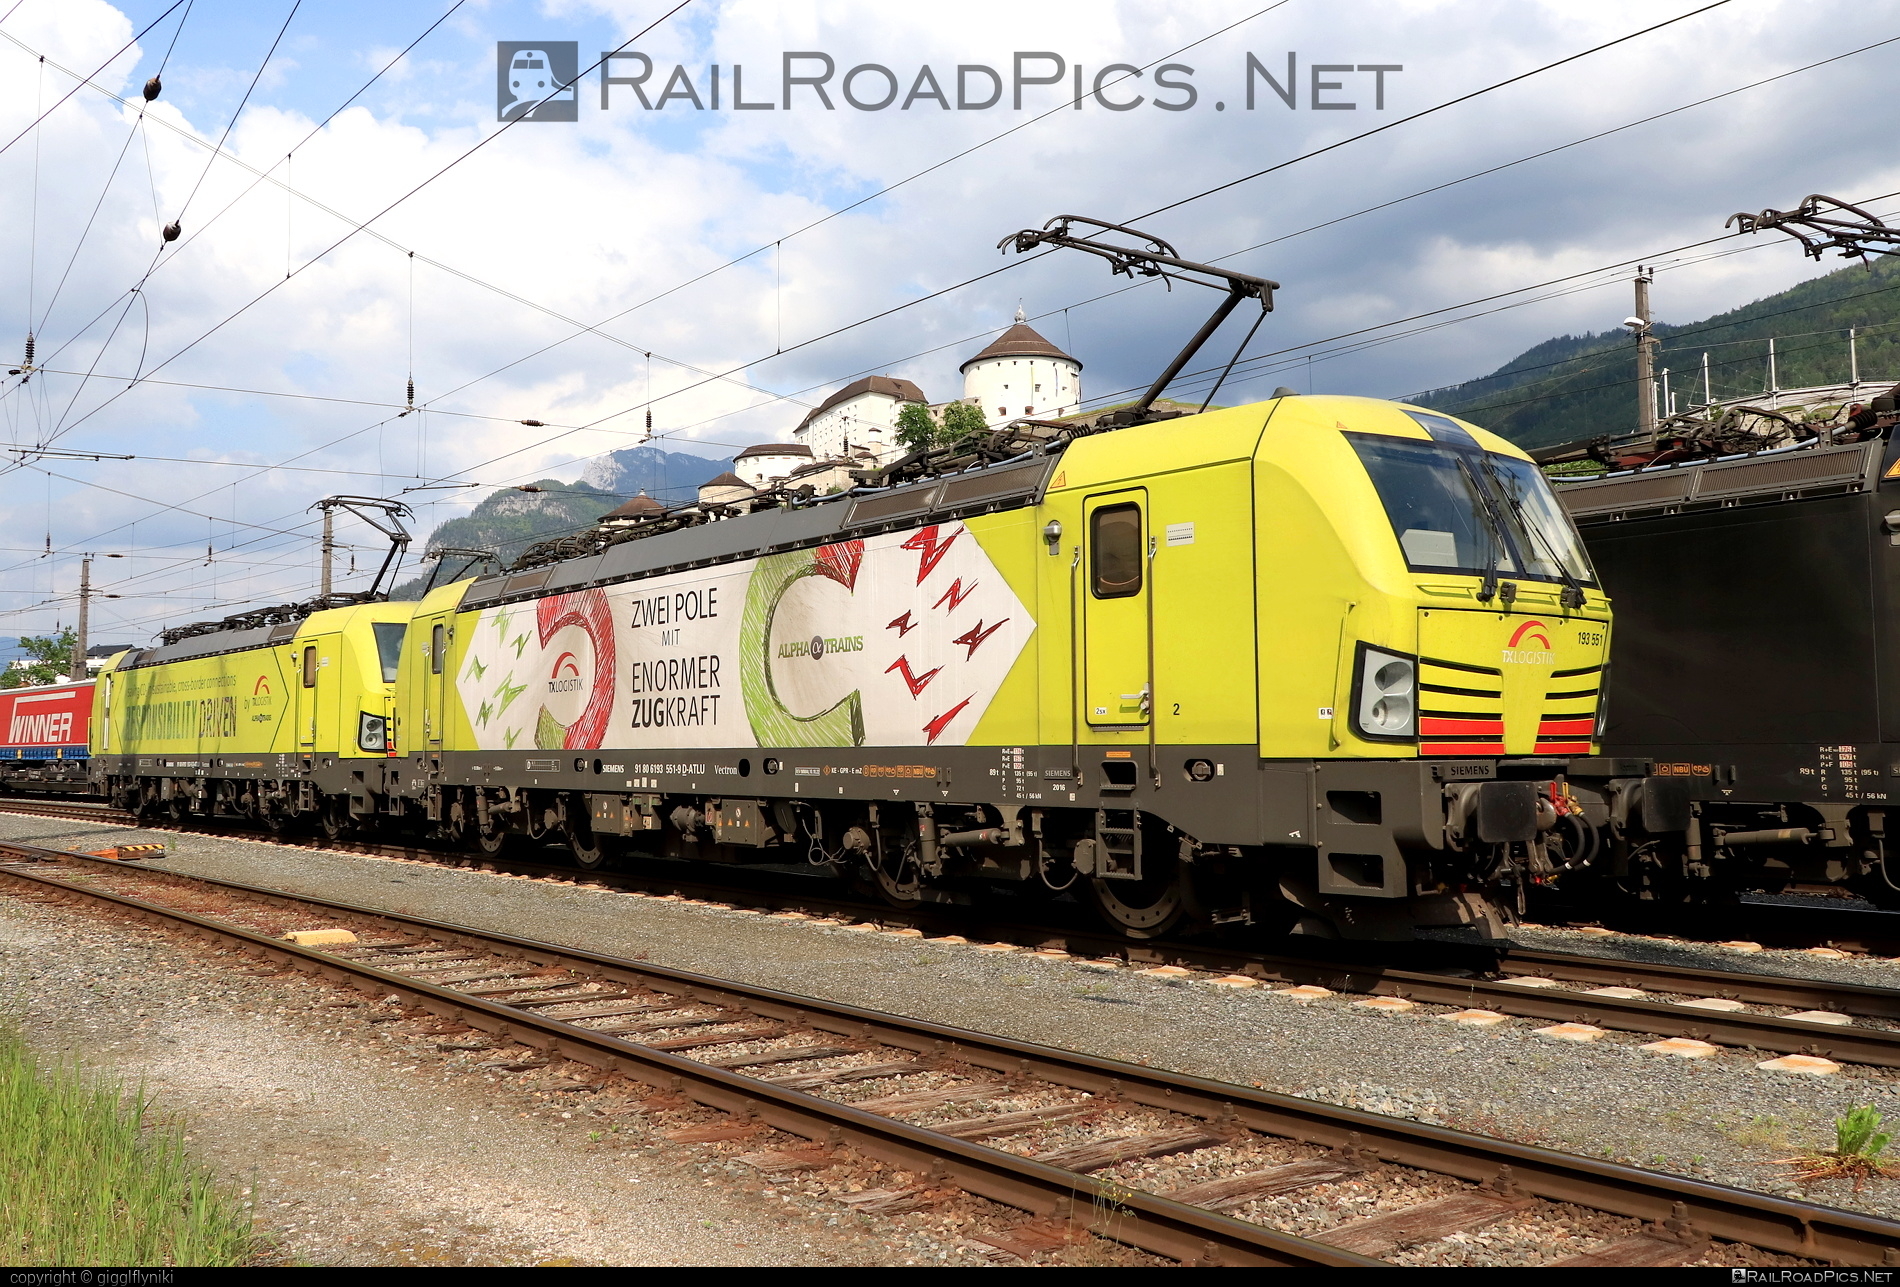 Siemens Vectron MS - 193 551 operated by TXLogistik #alphatrainsluxembourg #siemens #siemensVectron #siemensVectronMS #txlogistik #vectron #vectronMS